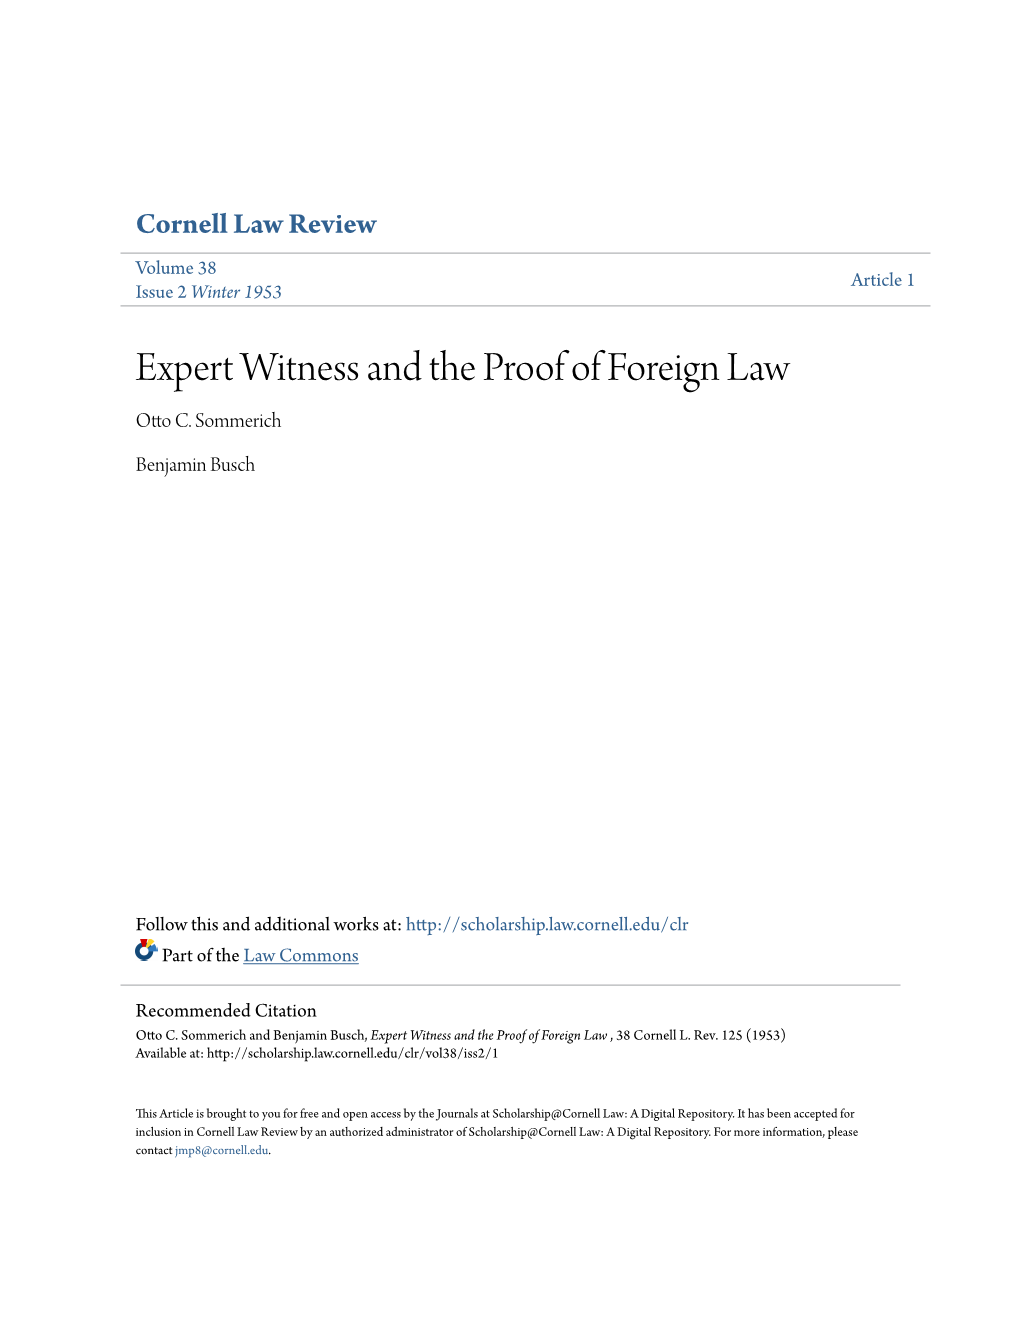 Expert Witness and the Proof of Foreign Law Otto C